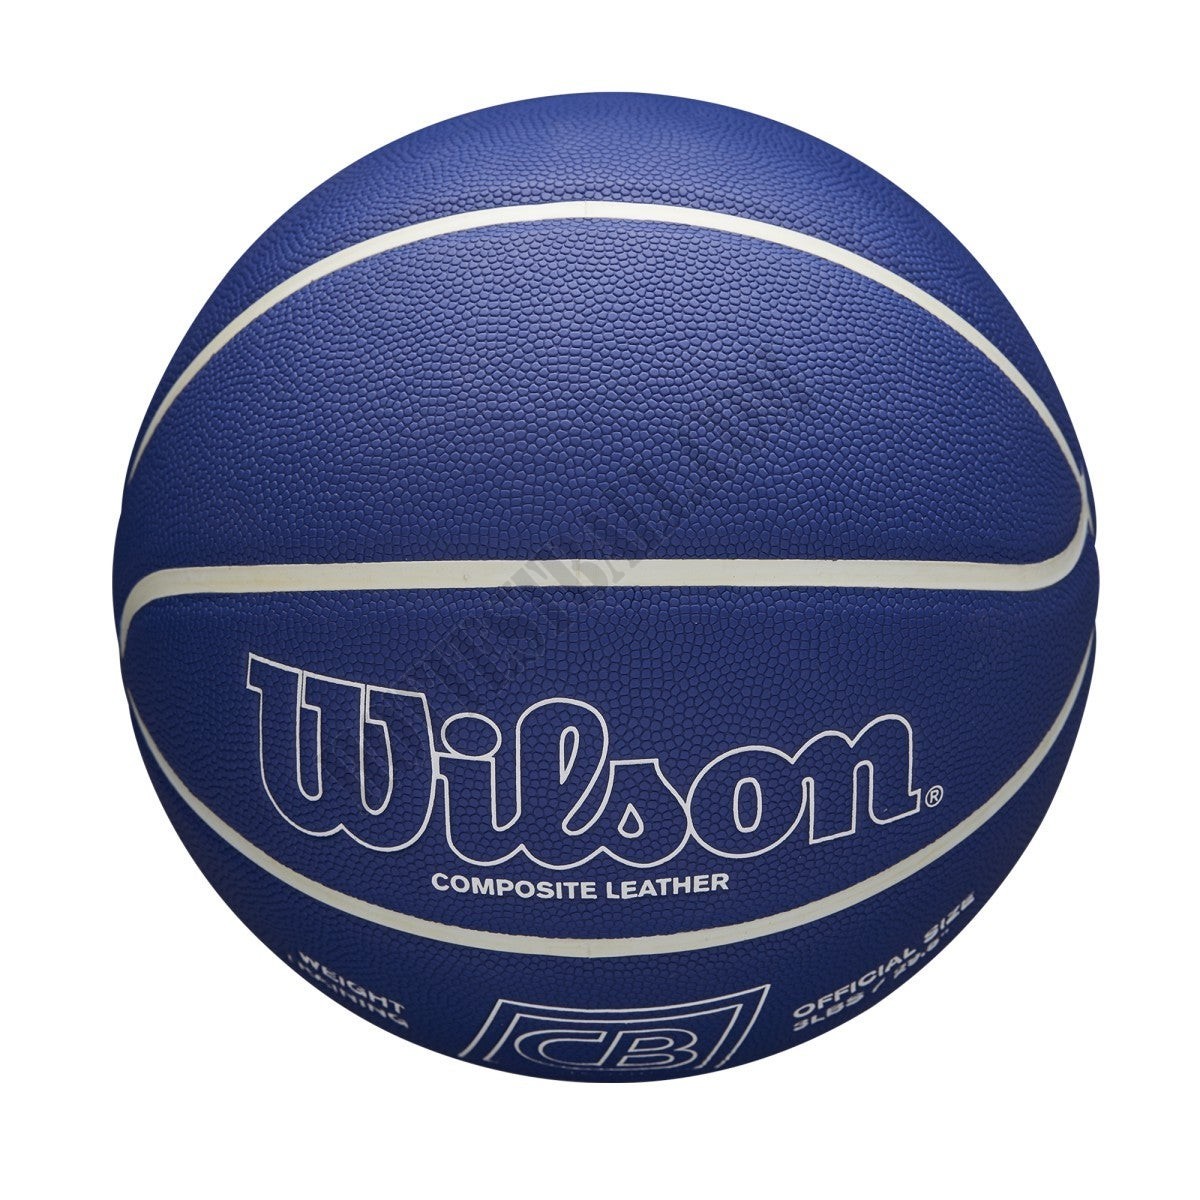 Chris Brickley Weighted Training Basketball - Wilson Discount Store - -4